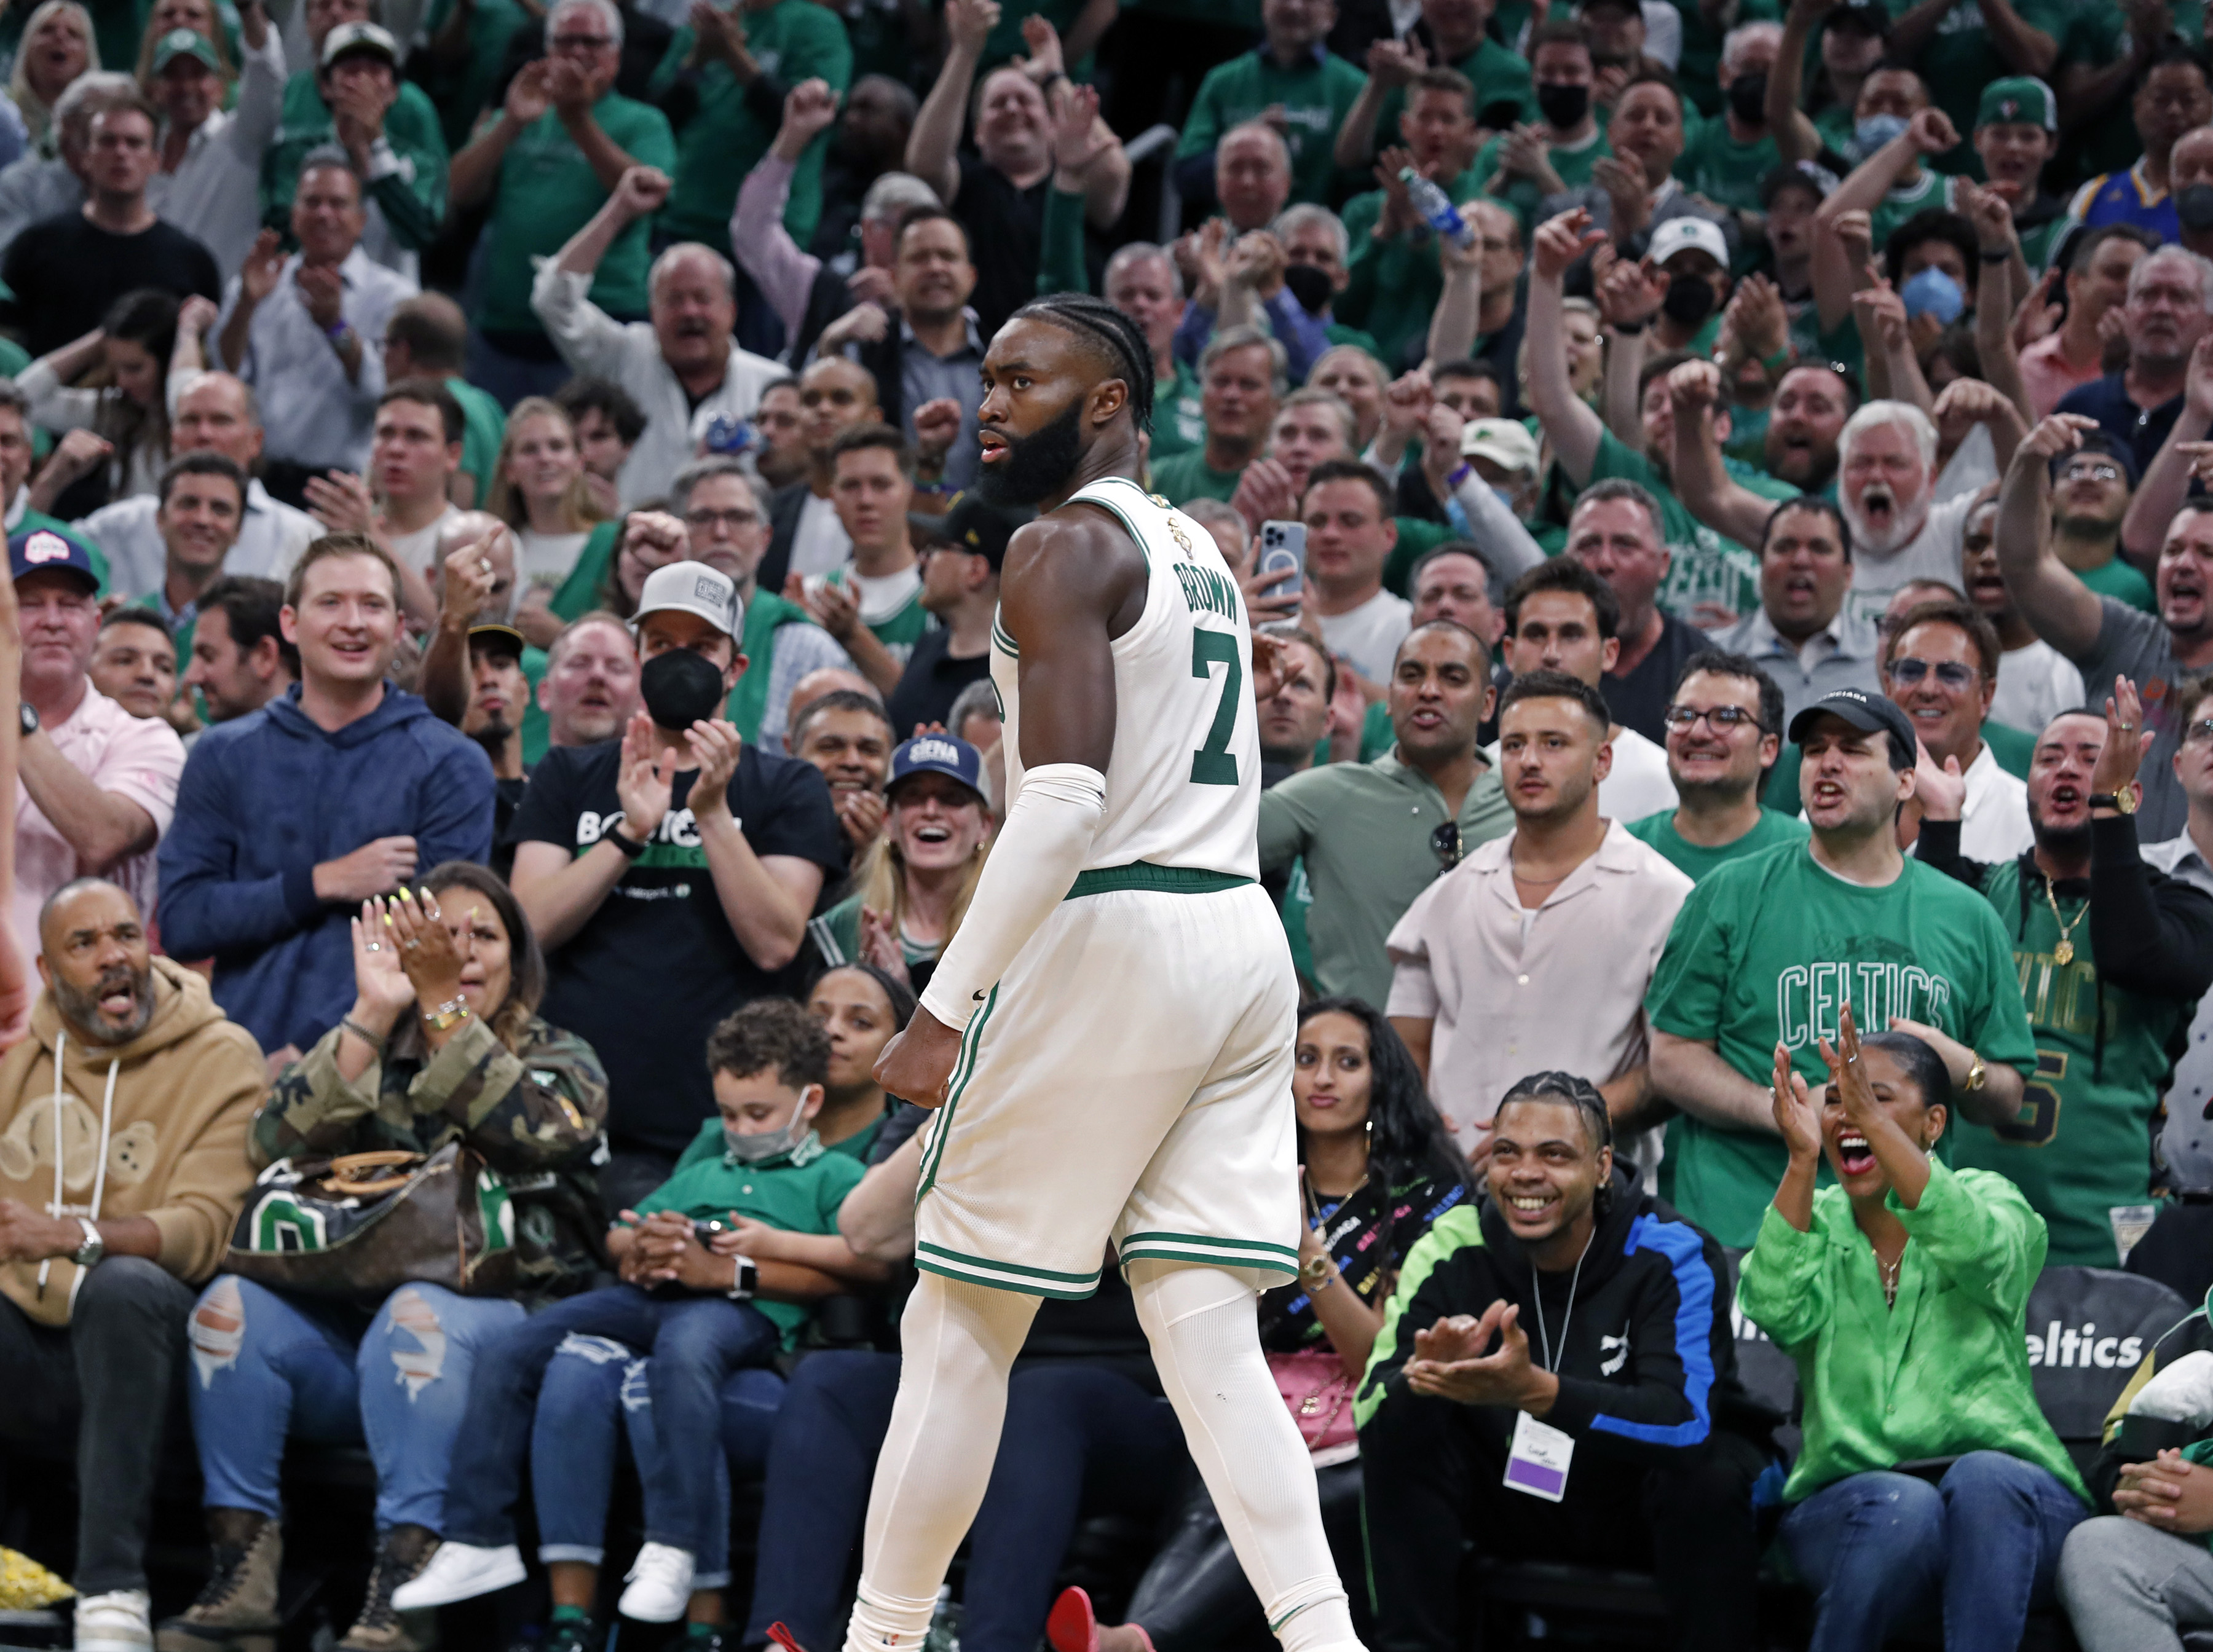 With some help from the Garden crowd, the Celtics rebounded in Game 3 —  just as they have all postseason - The Boston Globe